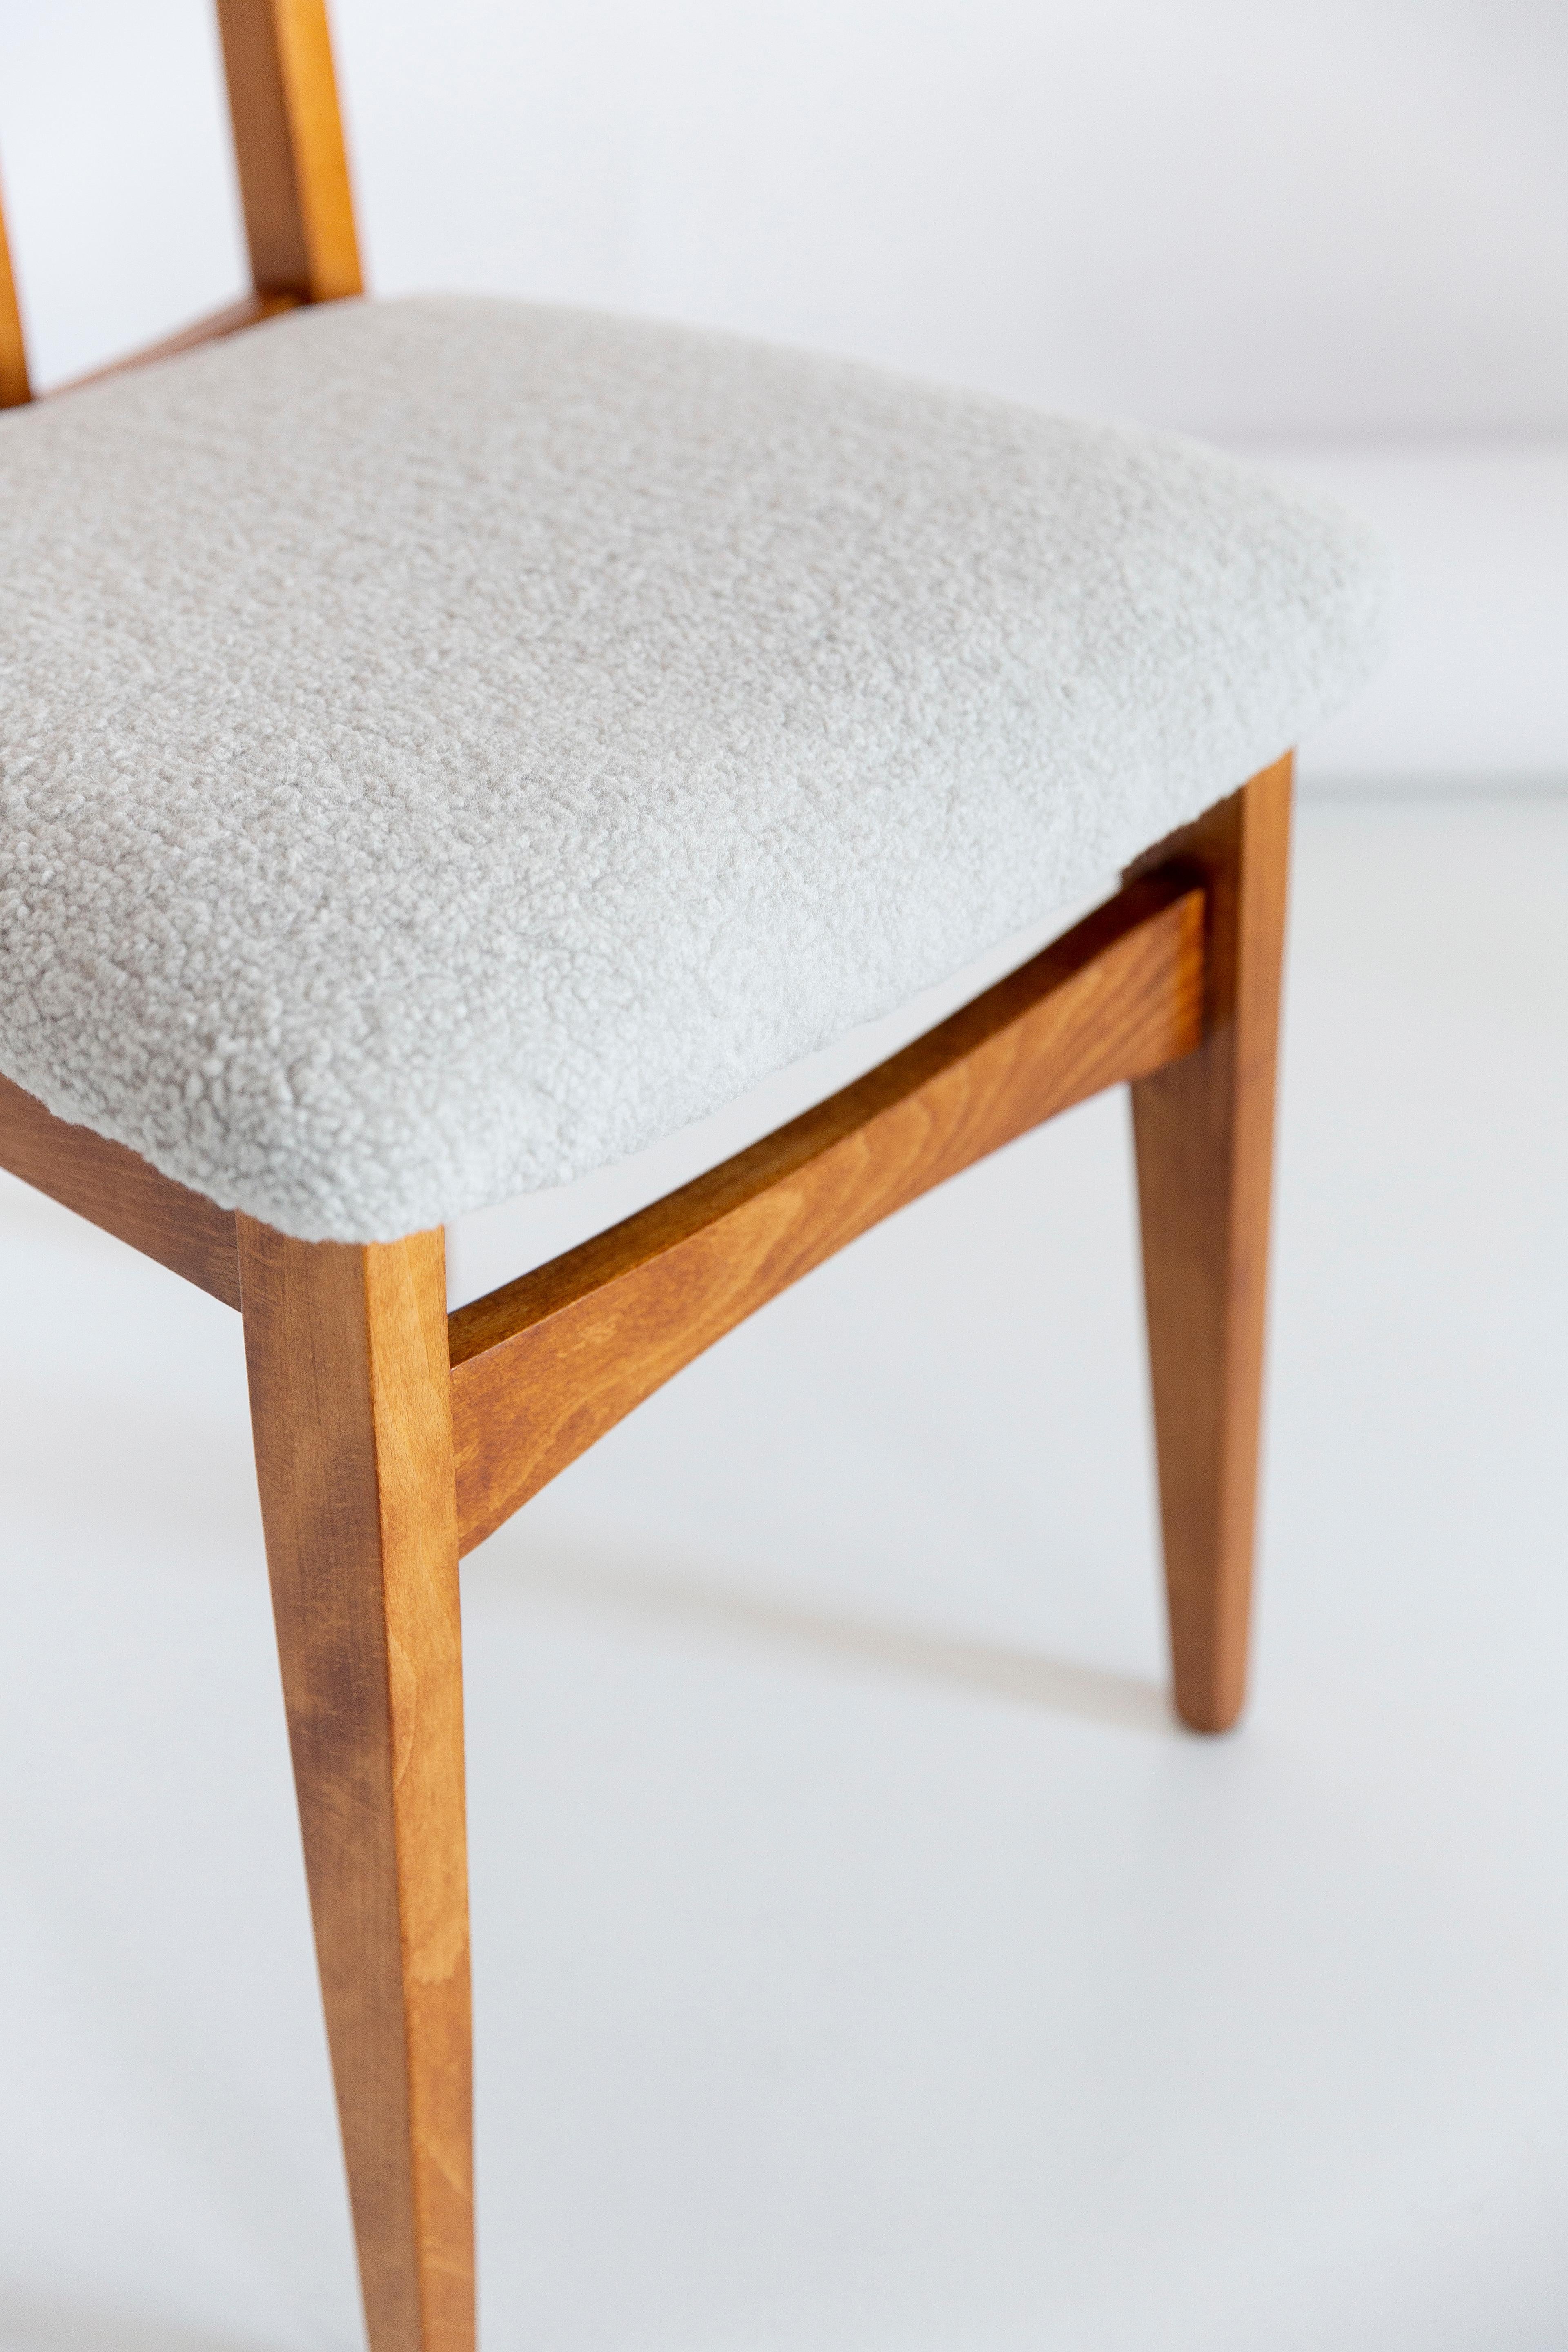 Hand-Crafted Mid-Century Modern Linen Boucle Chair, Designed by M. Zielinski, Europe, 1960s For Sale